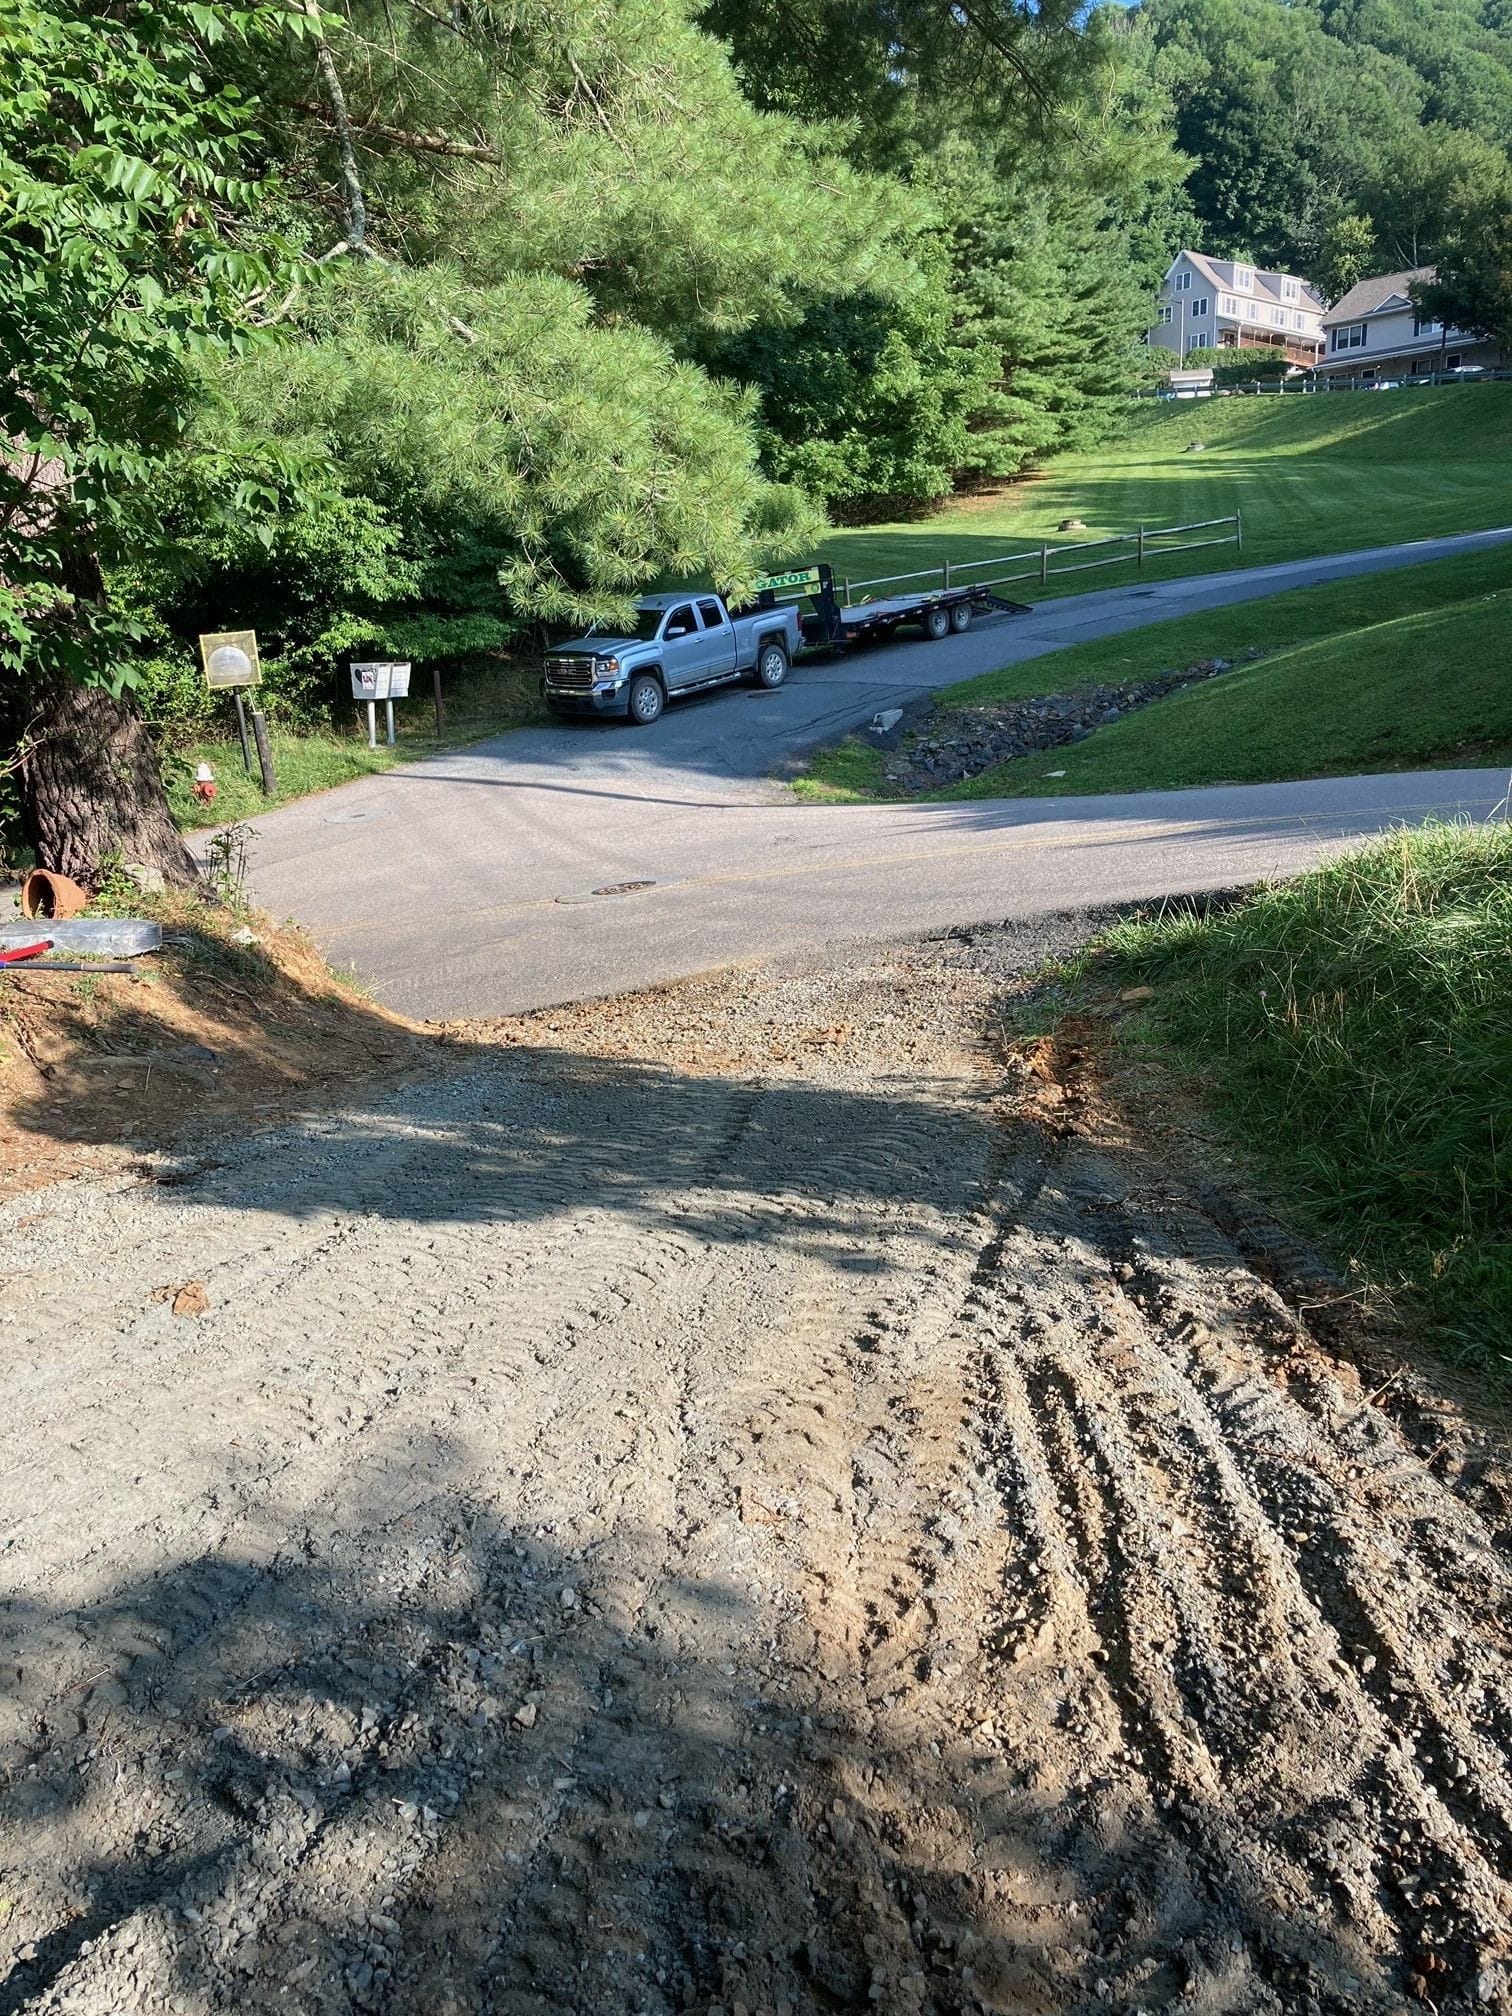 This driveway has a very steep enterance and erosion problems.